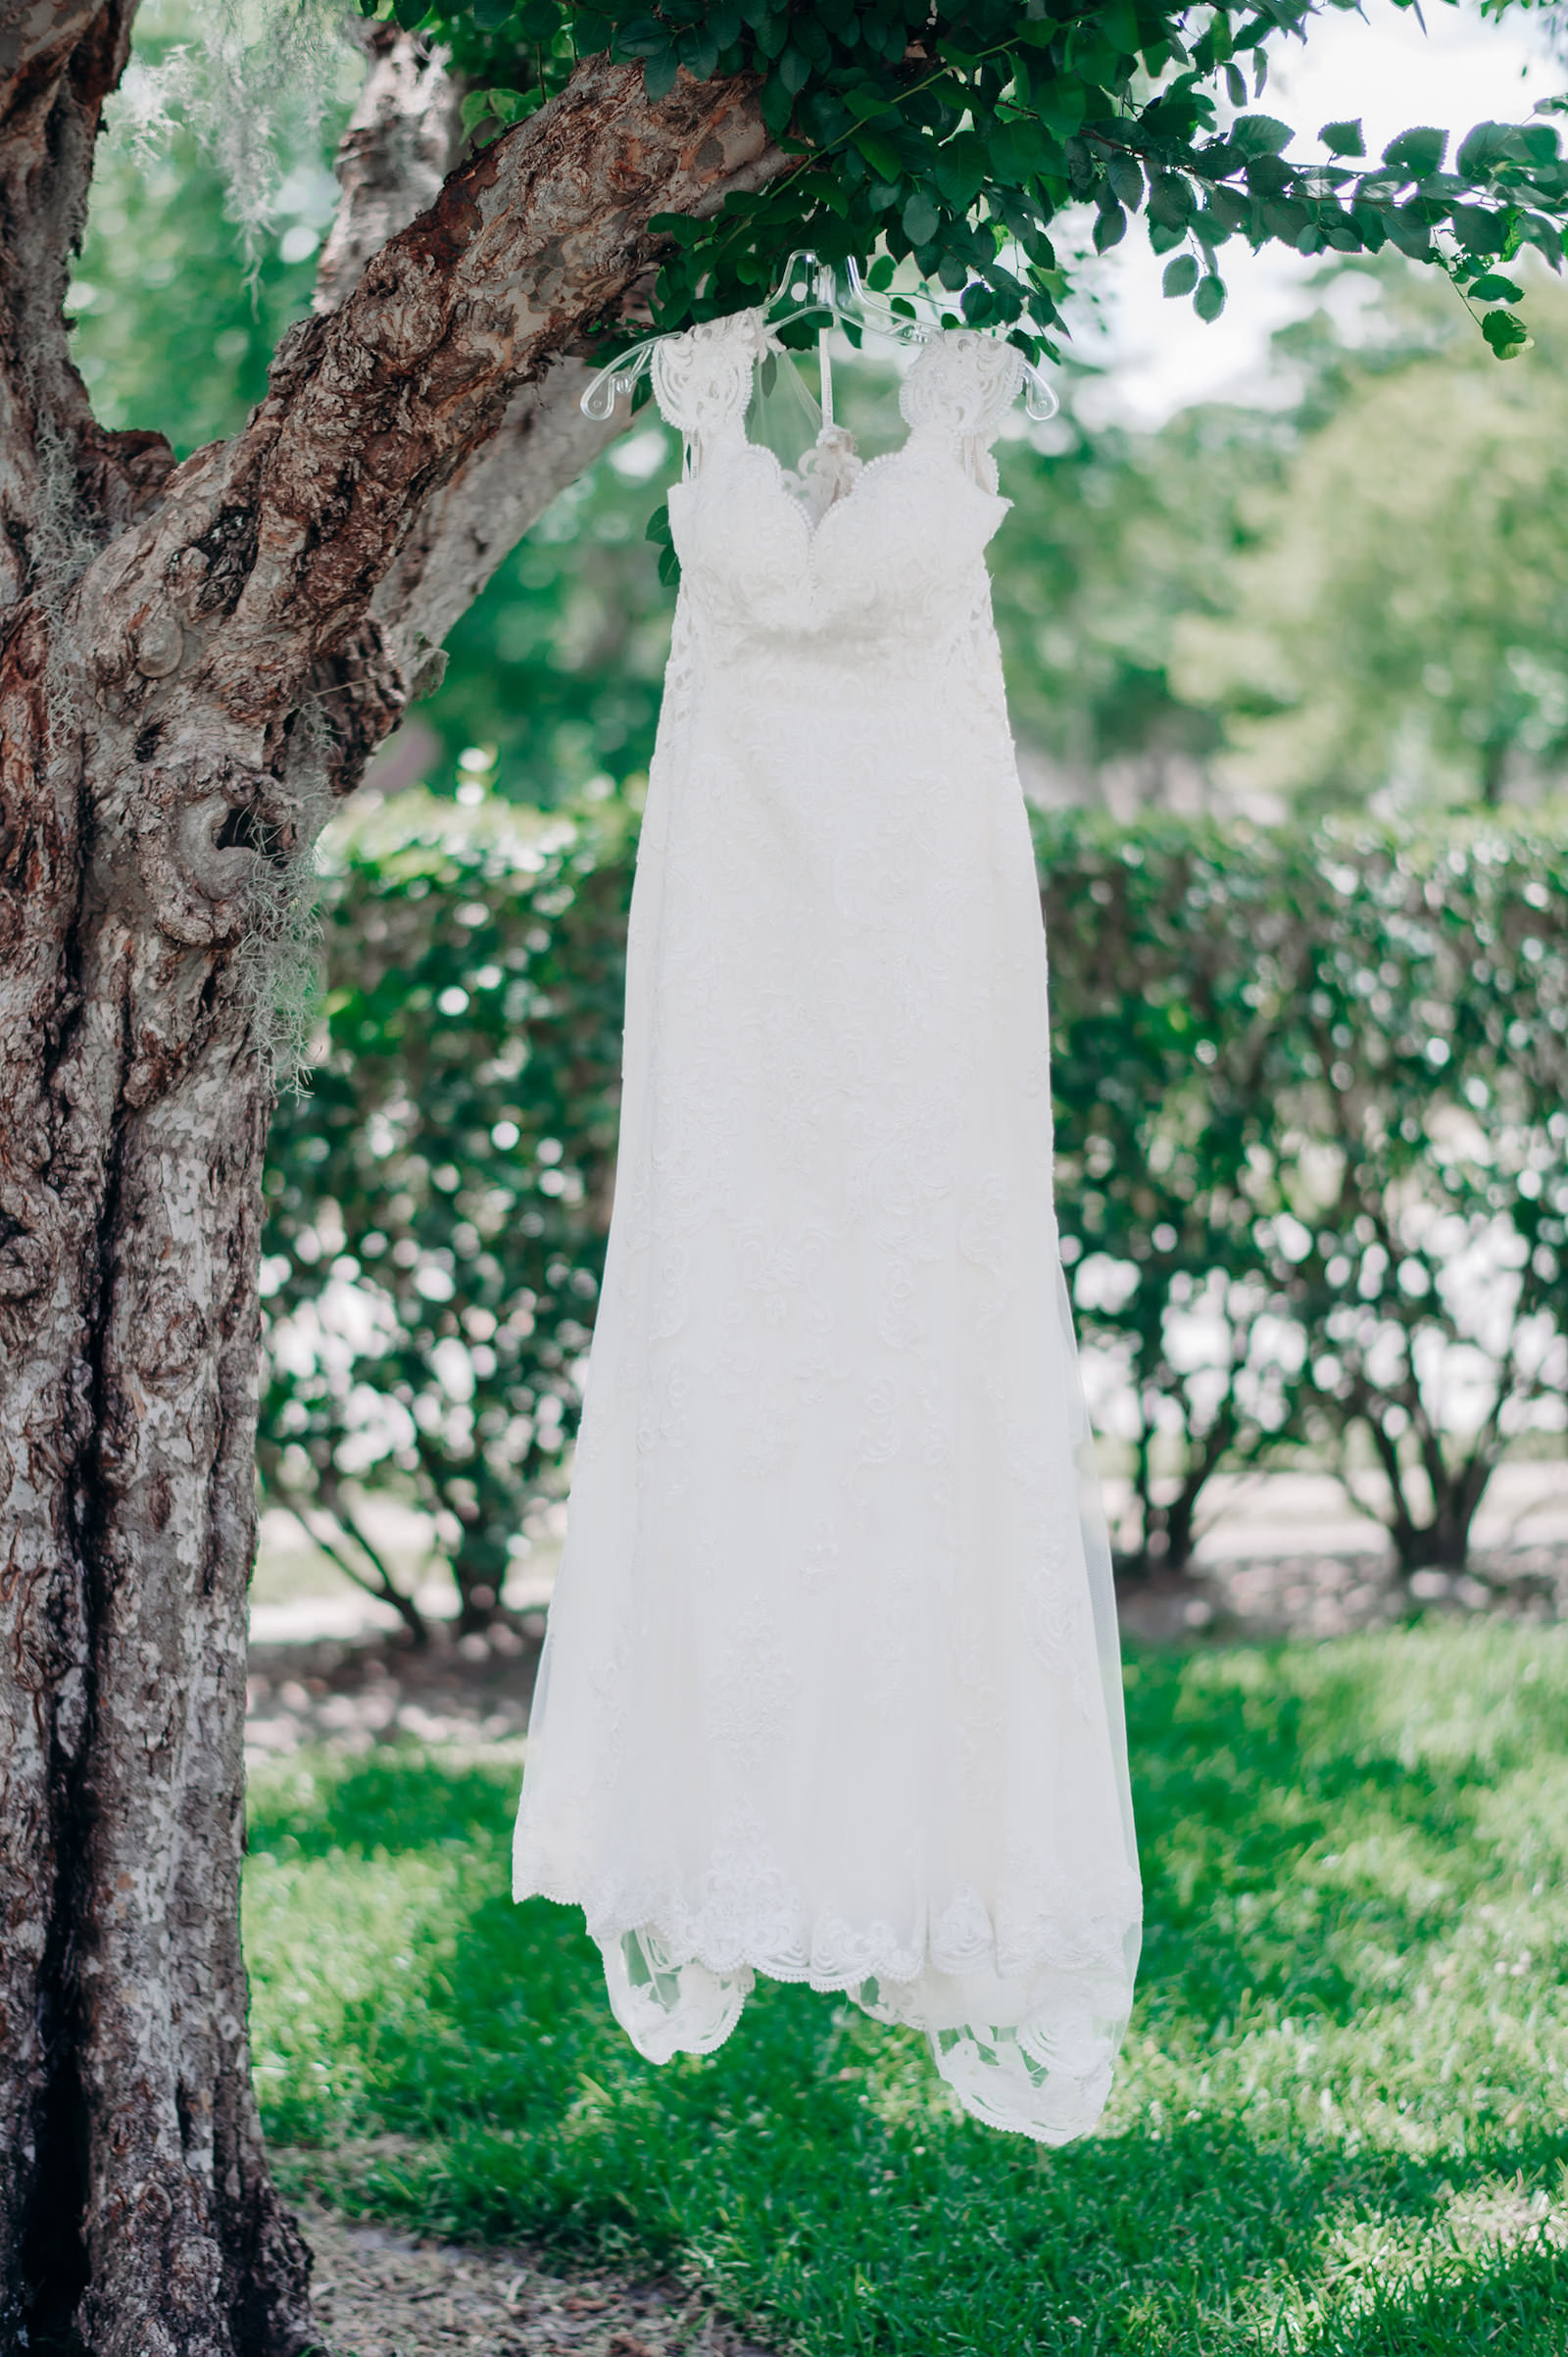 White Lace Wedding Dress Hanging From a Tree Wedding Portrait